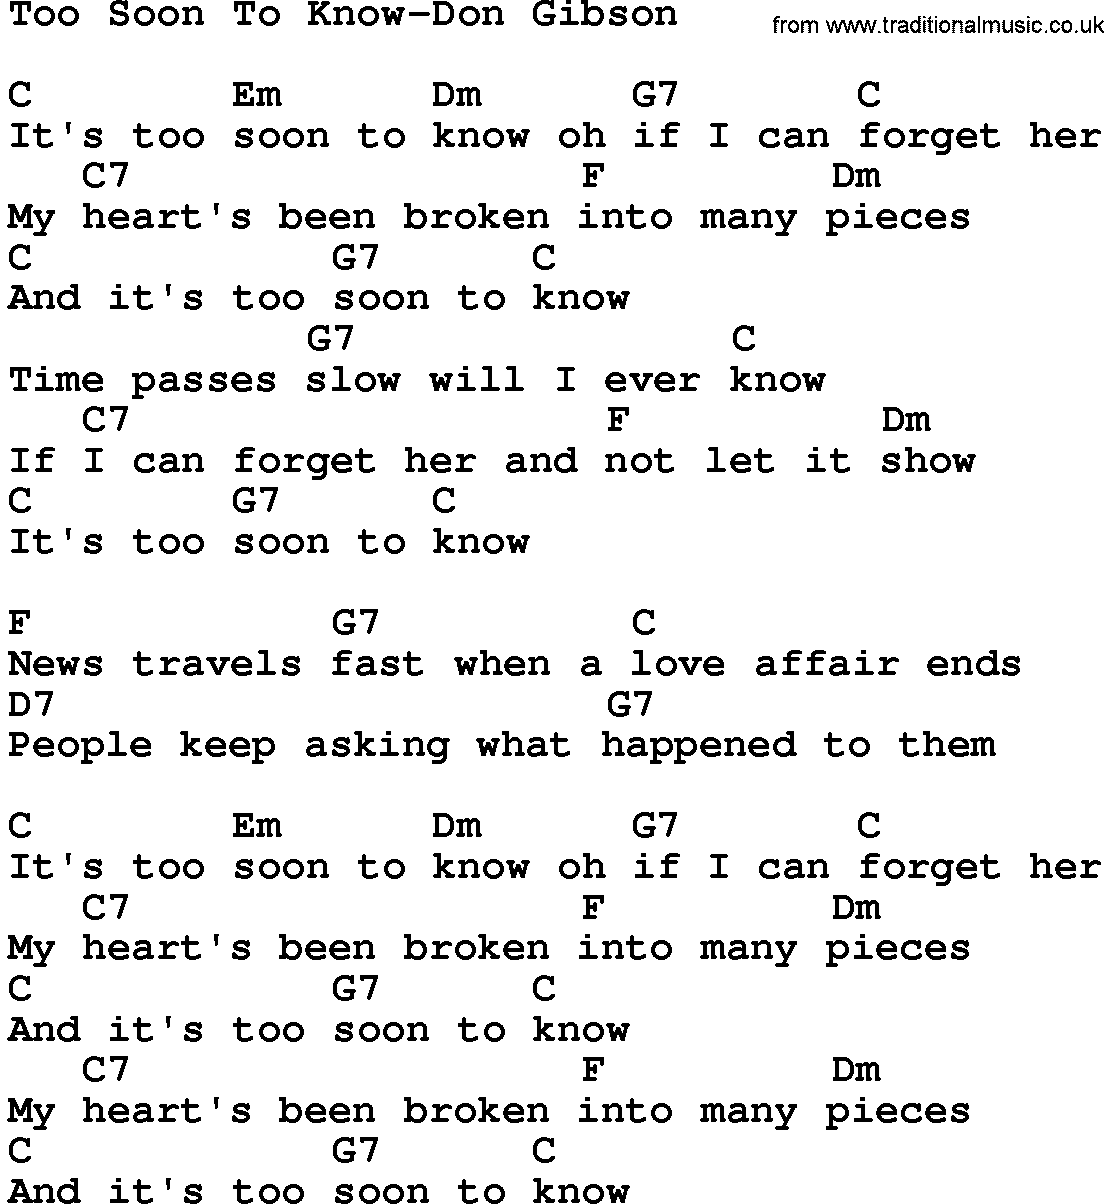 Country music song: Too Soon To Know-Don Gibson lyrics and chords